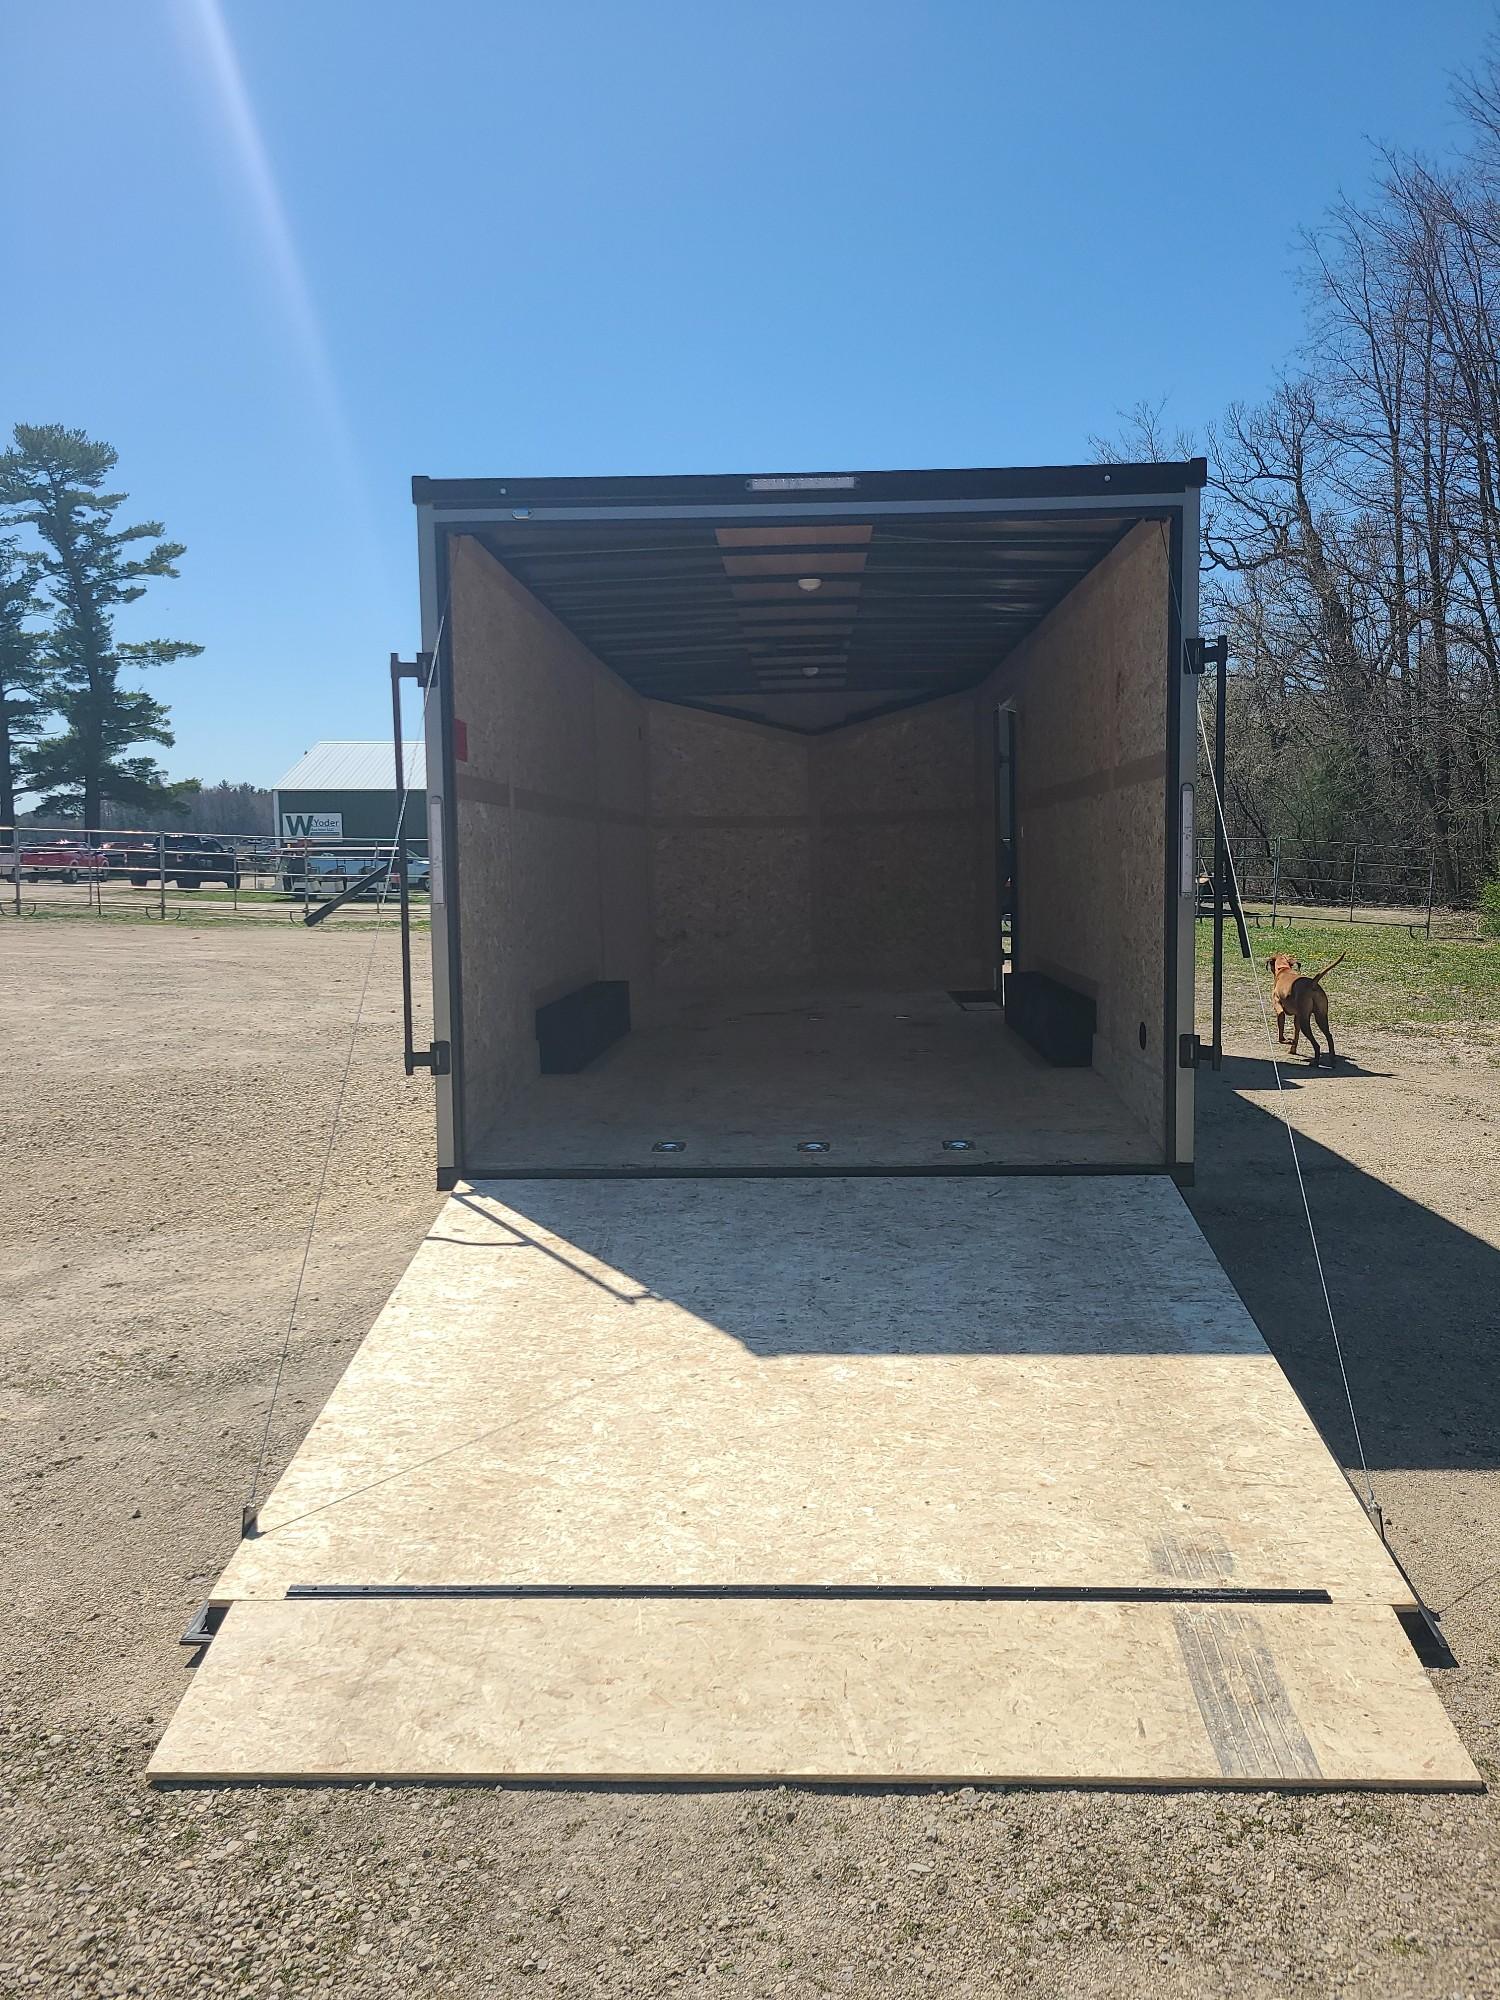 2023 23' Stealth Dual Axel Enclosed Trailer